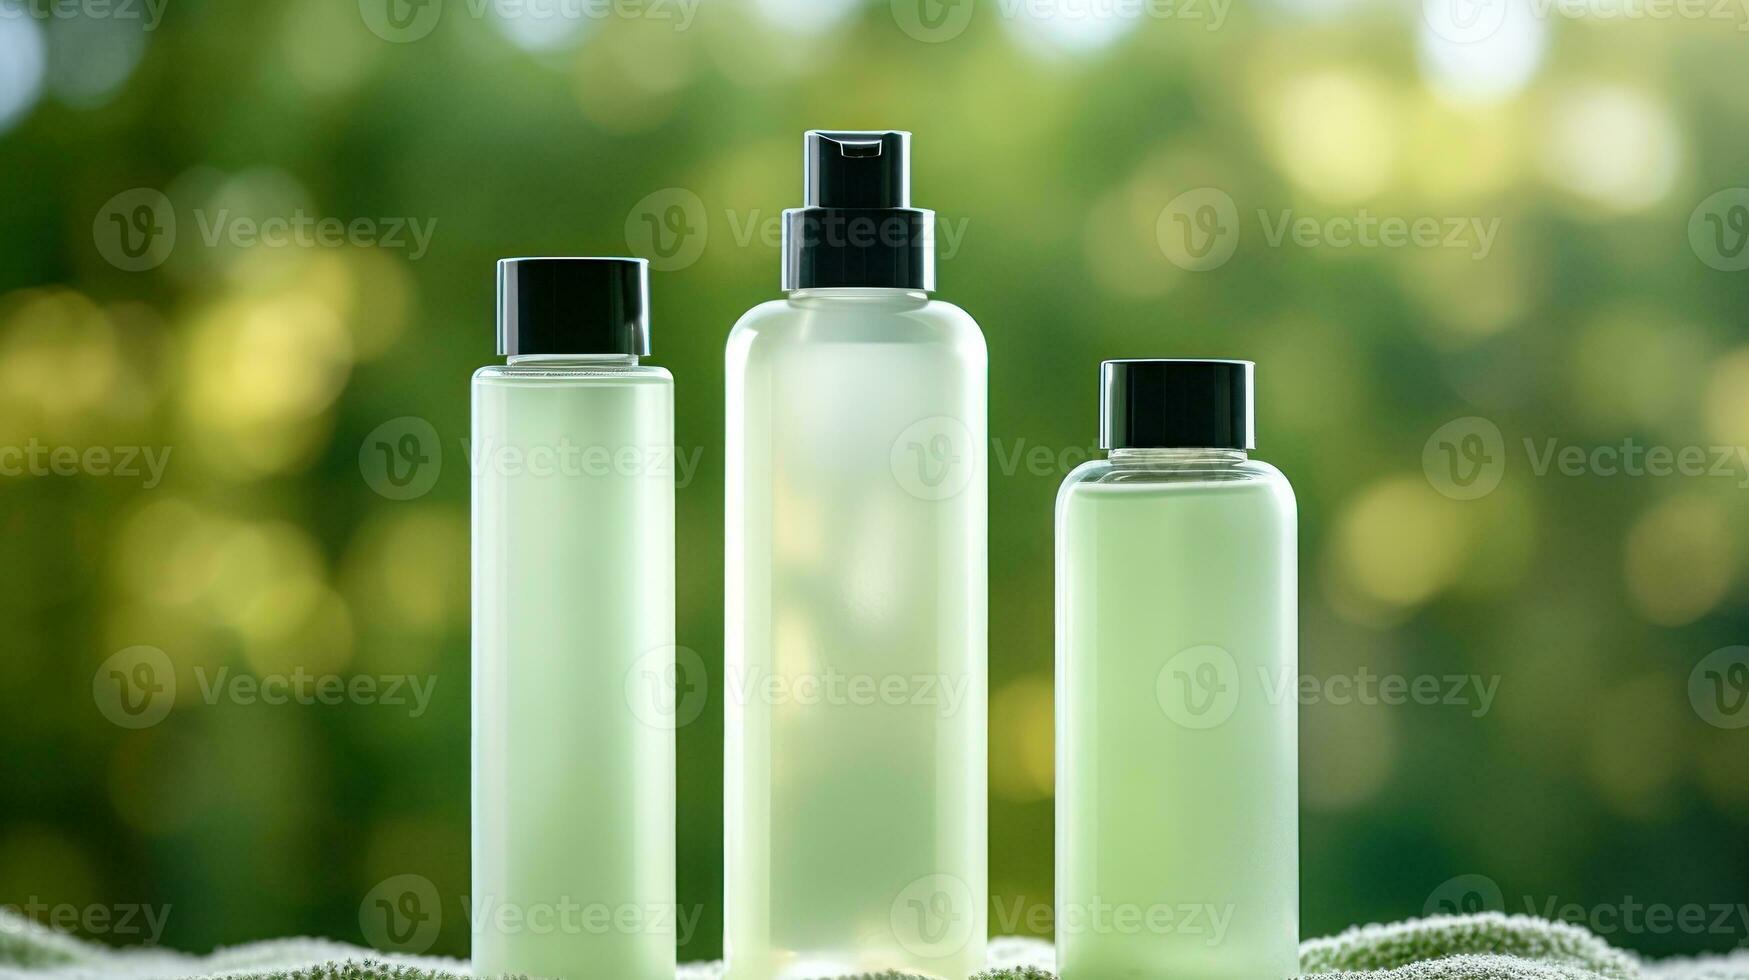 Cosmetic bottles template on green bokeh background photo